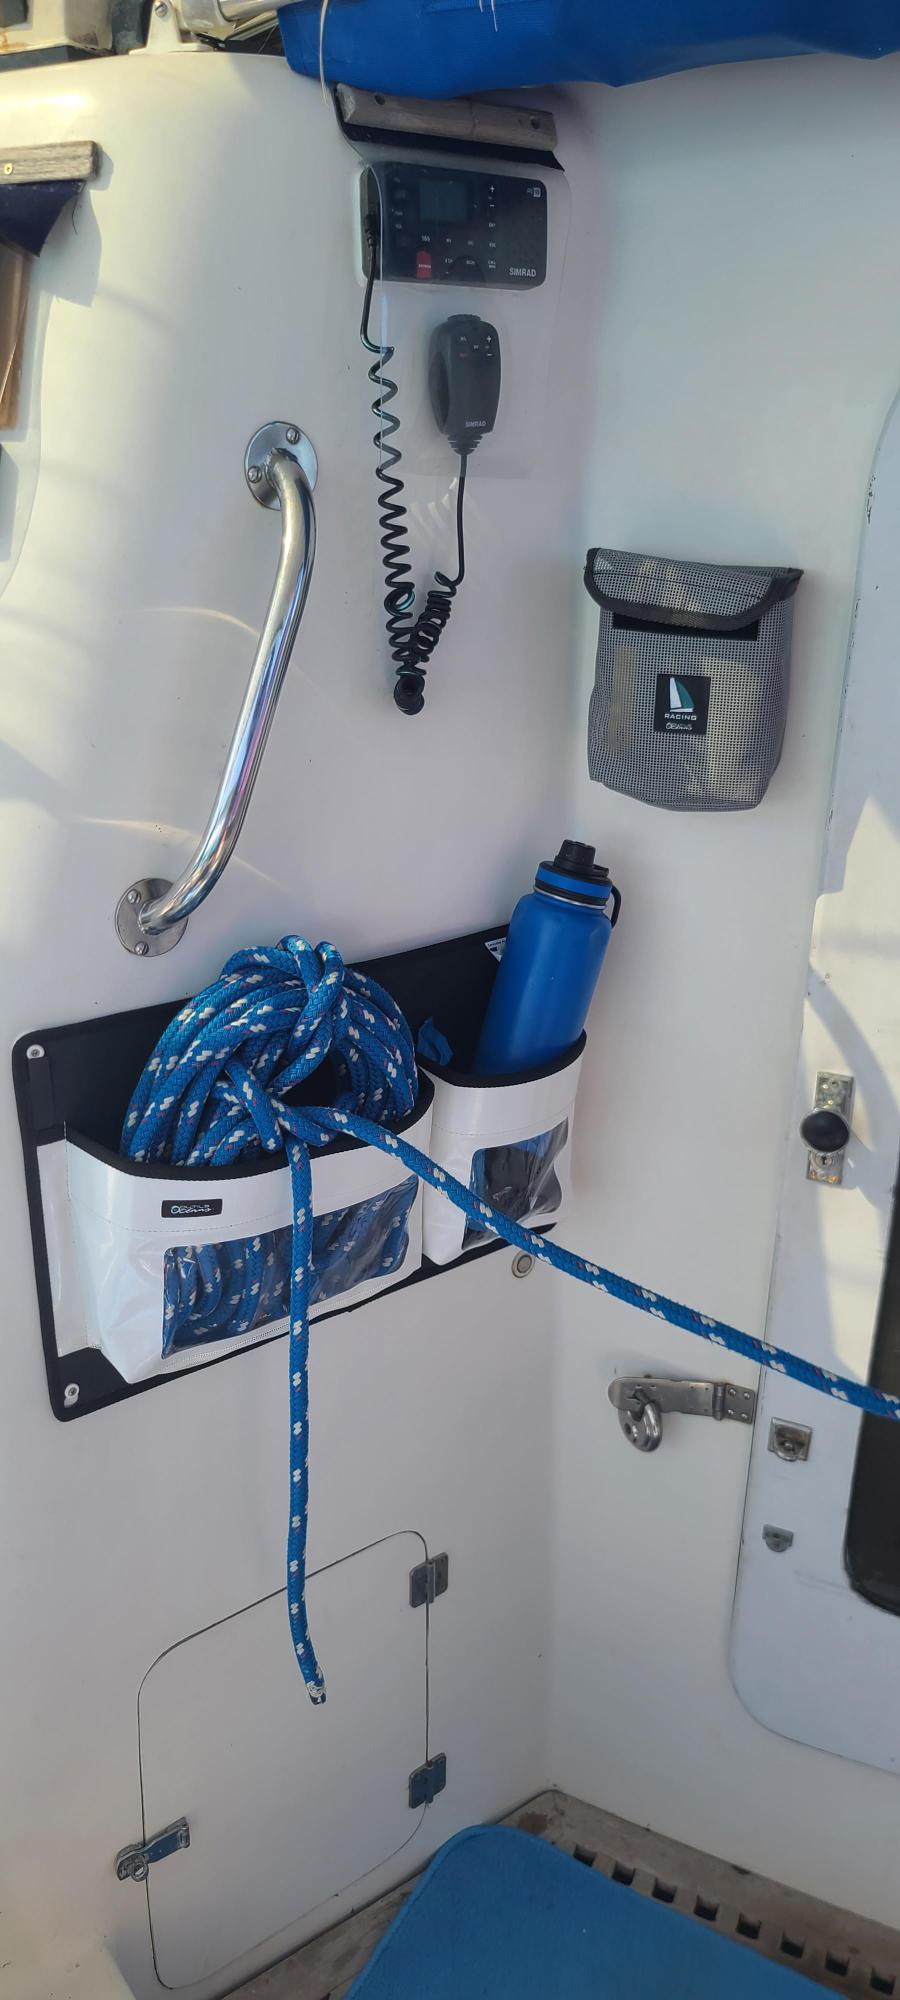 Real Lifesavers to Organize your Boat